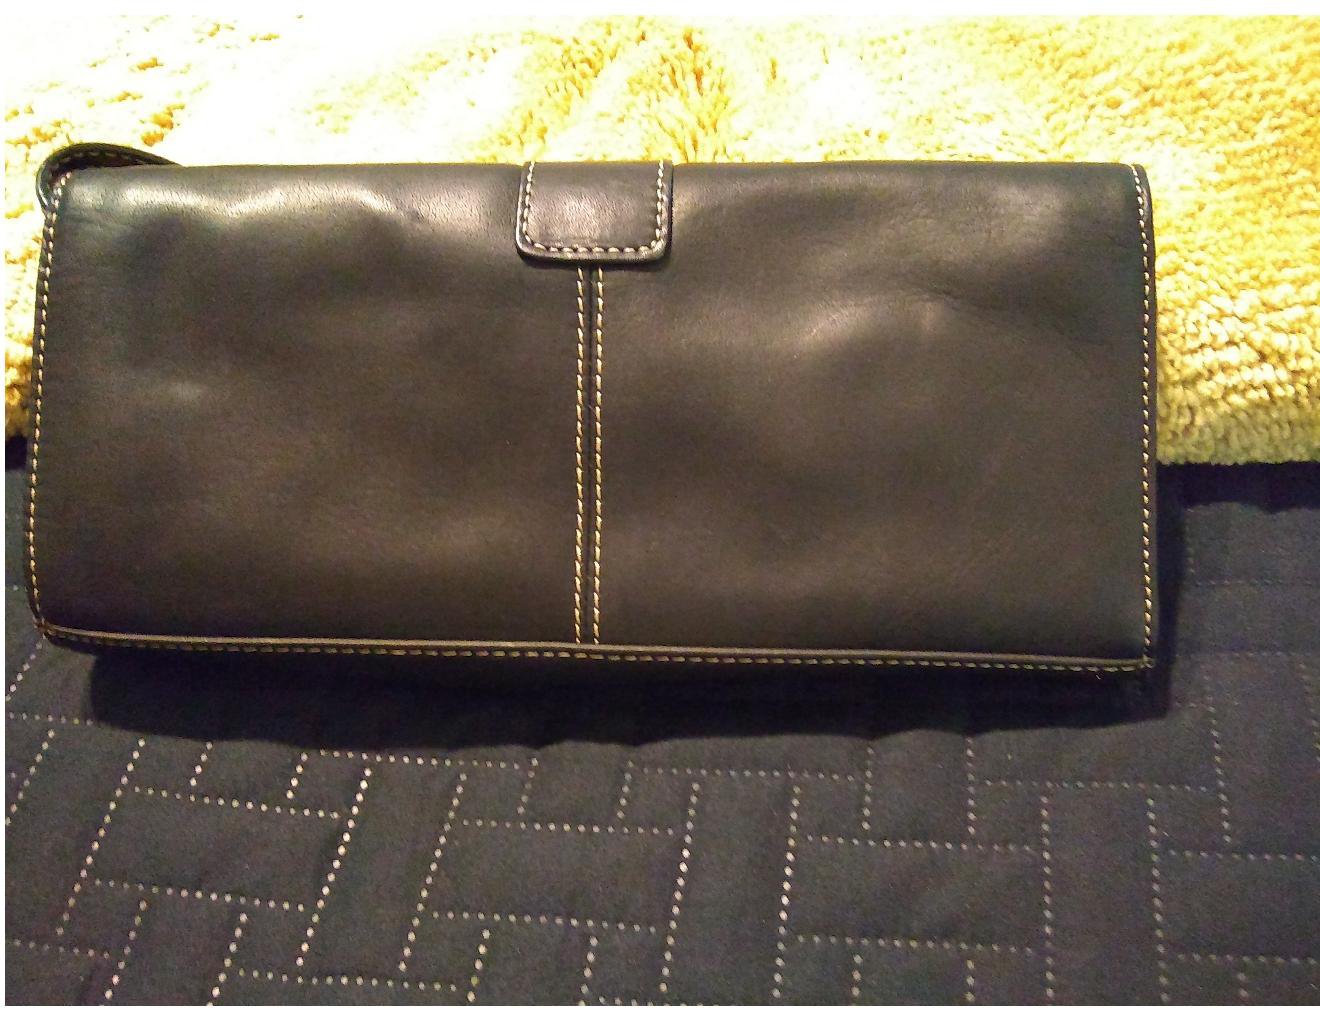 NEW Black Leather Silver Buckle Clutch Wallet Billfold by Apostrophe ...